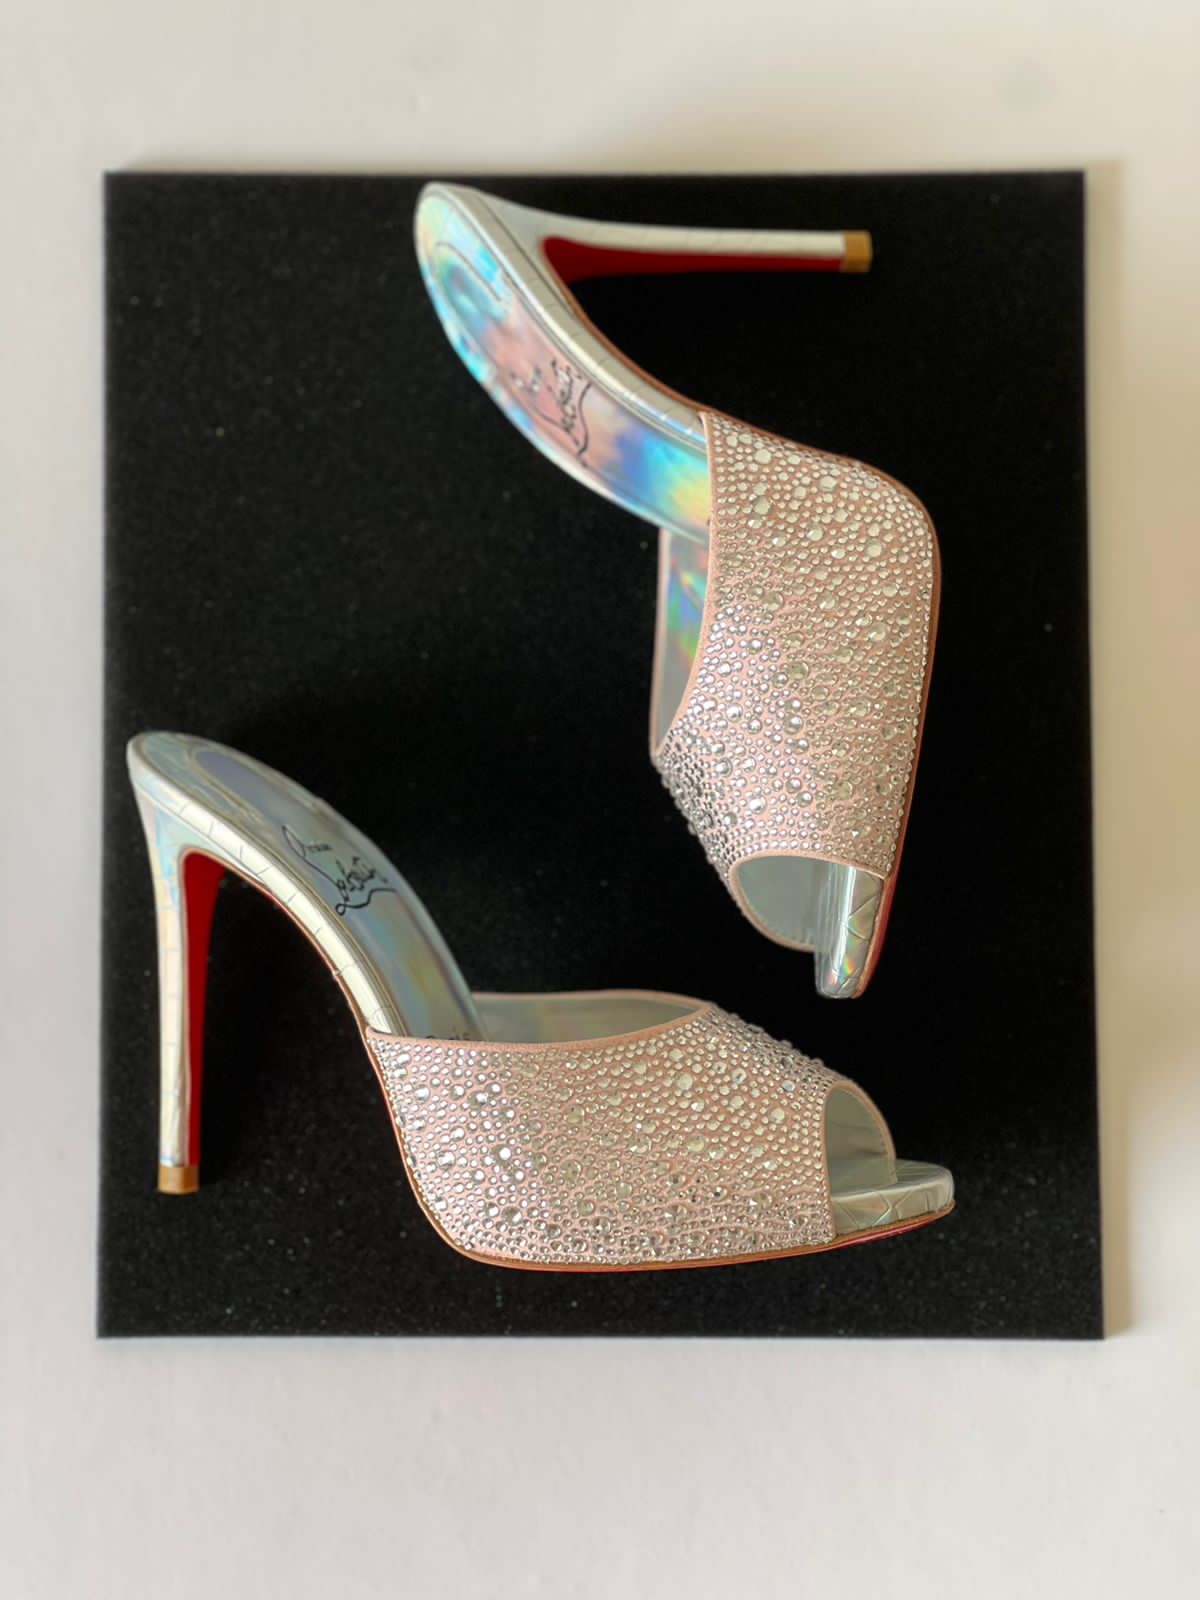 Louboutin Style #2 Shoes